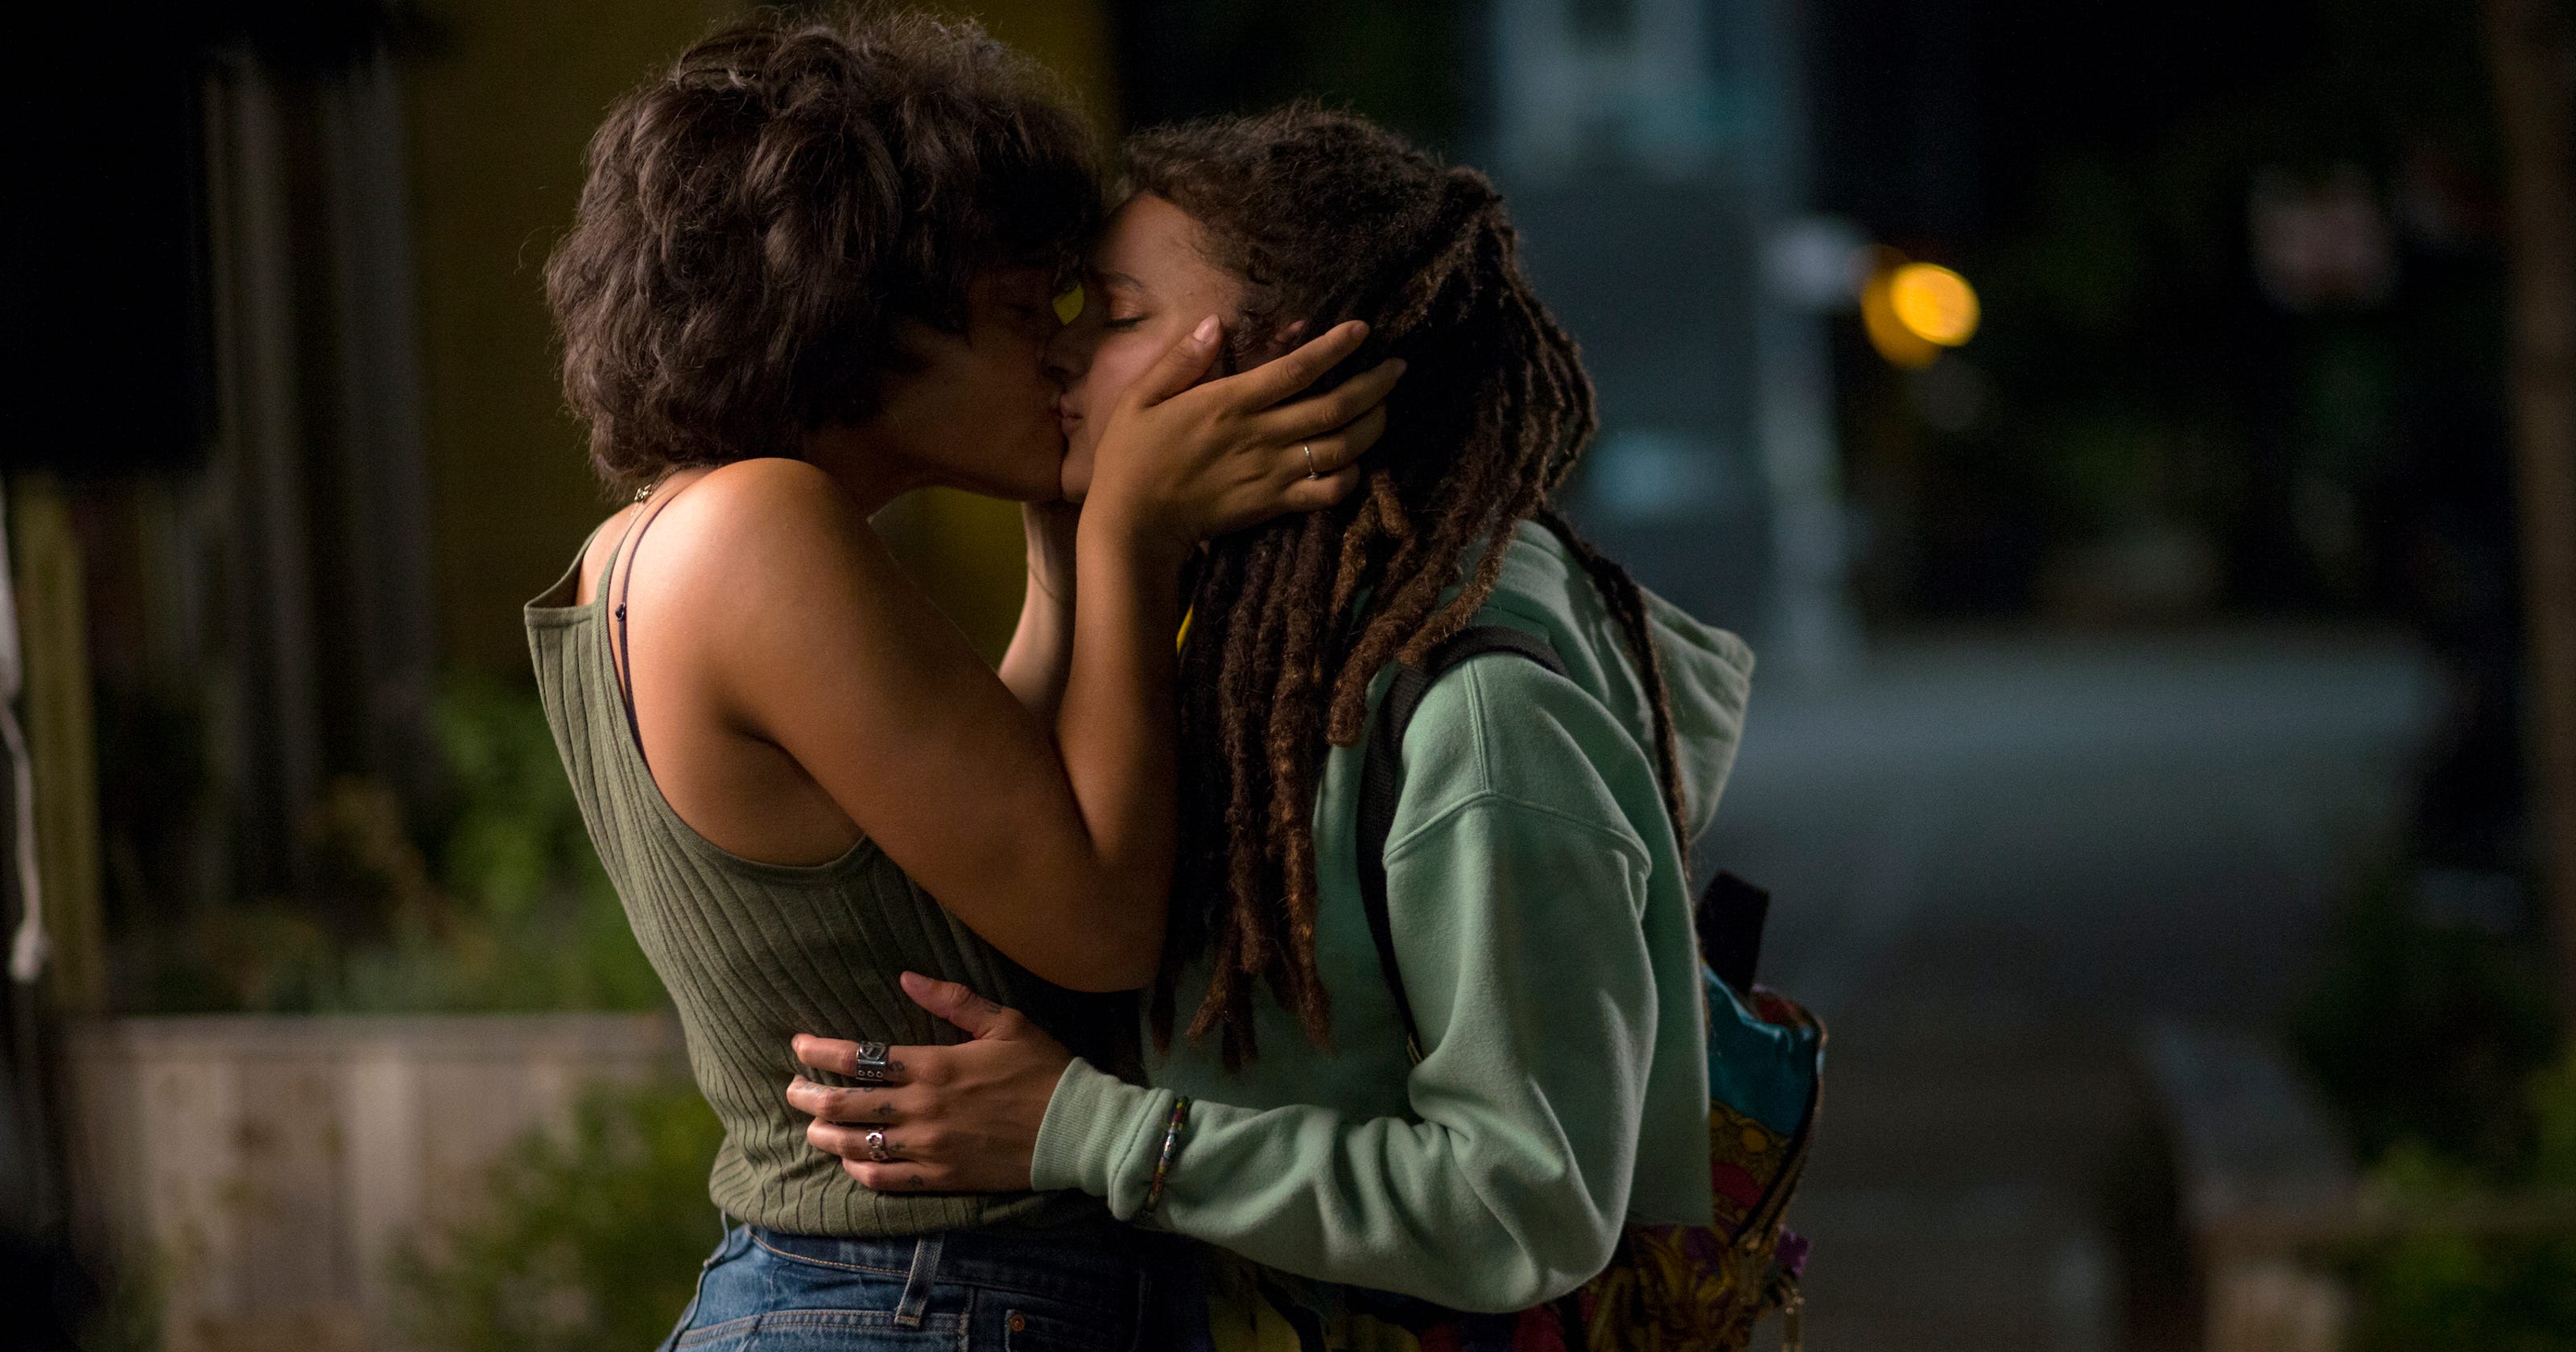 In New Lgbtq Movies And Tv Shows Coming Out Is Anything But Tragic